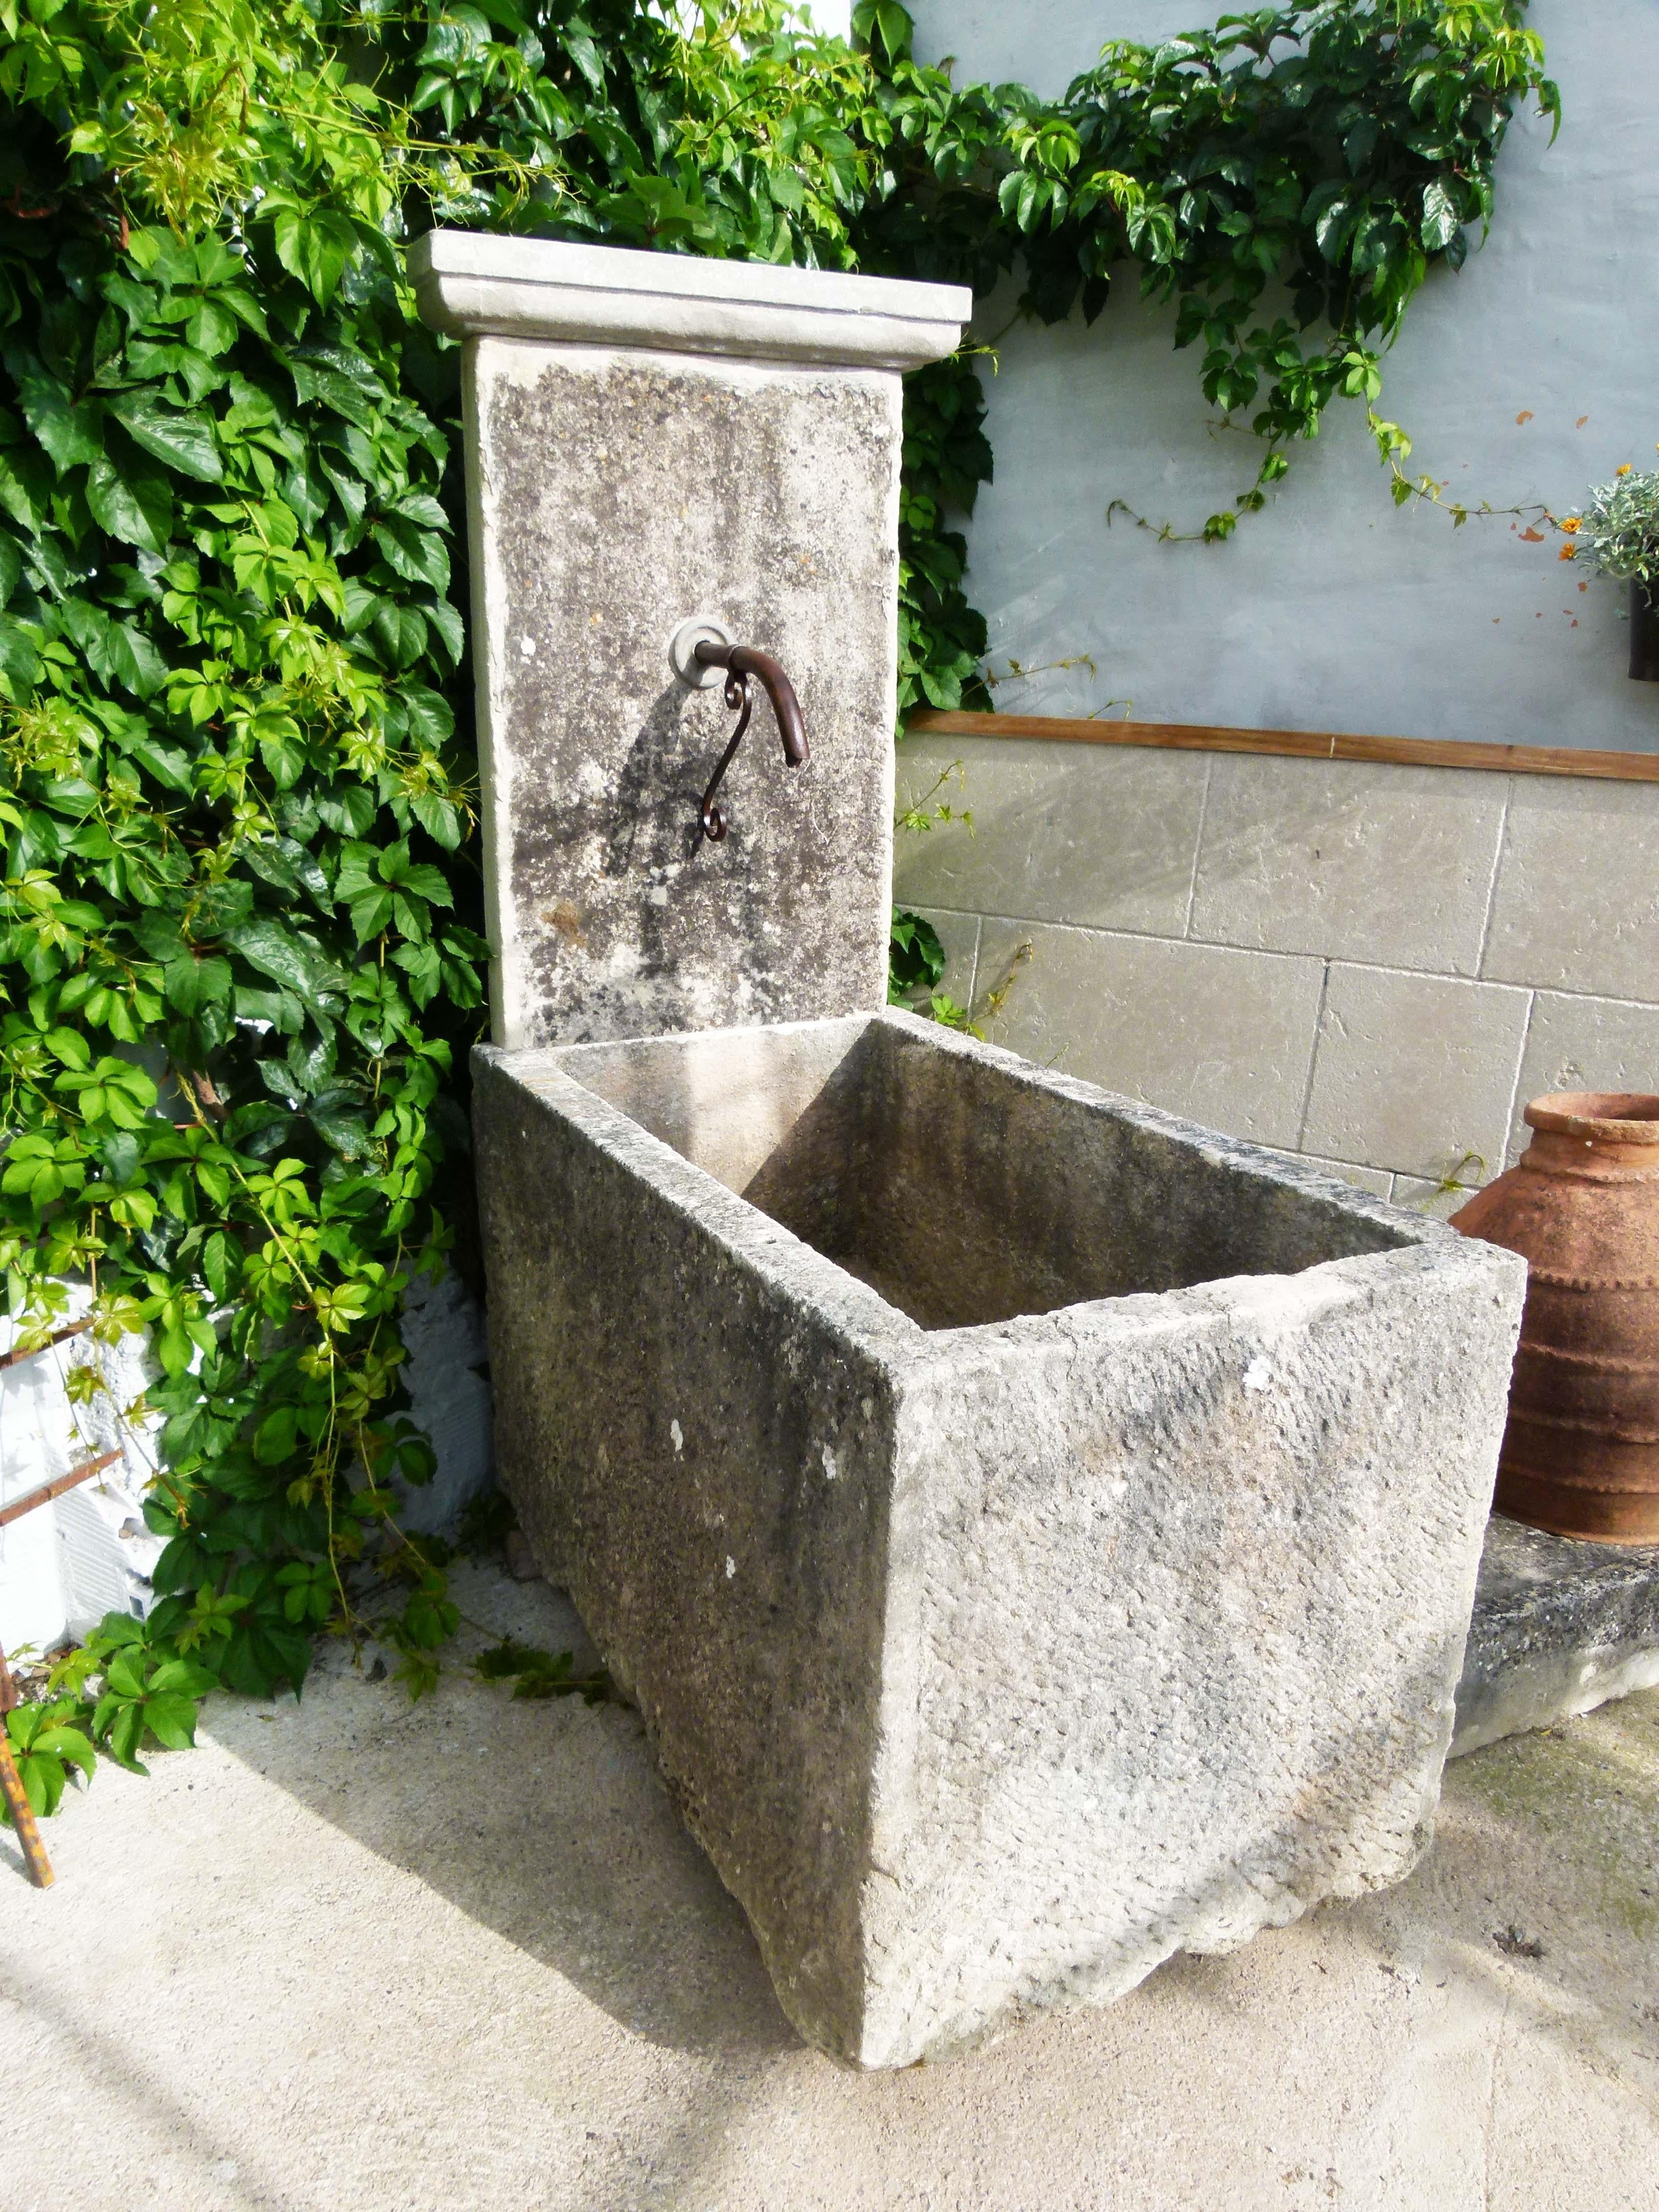 This fountain was assembled in the 20th century with quaternary limestone pieces from Portugal. The limestone shows signs of natural erosion that have taken place along the time. This is what makes this piece special: Steeped in history and in turn